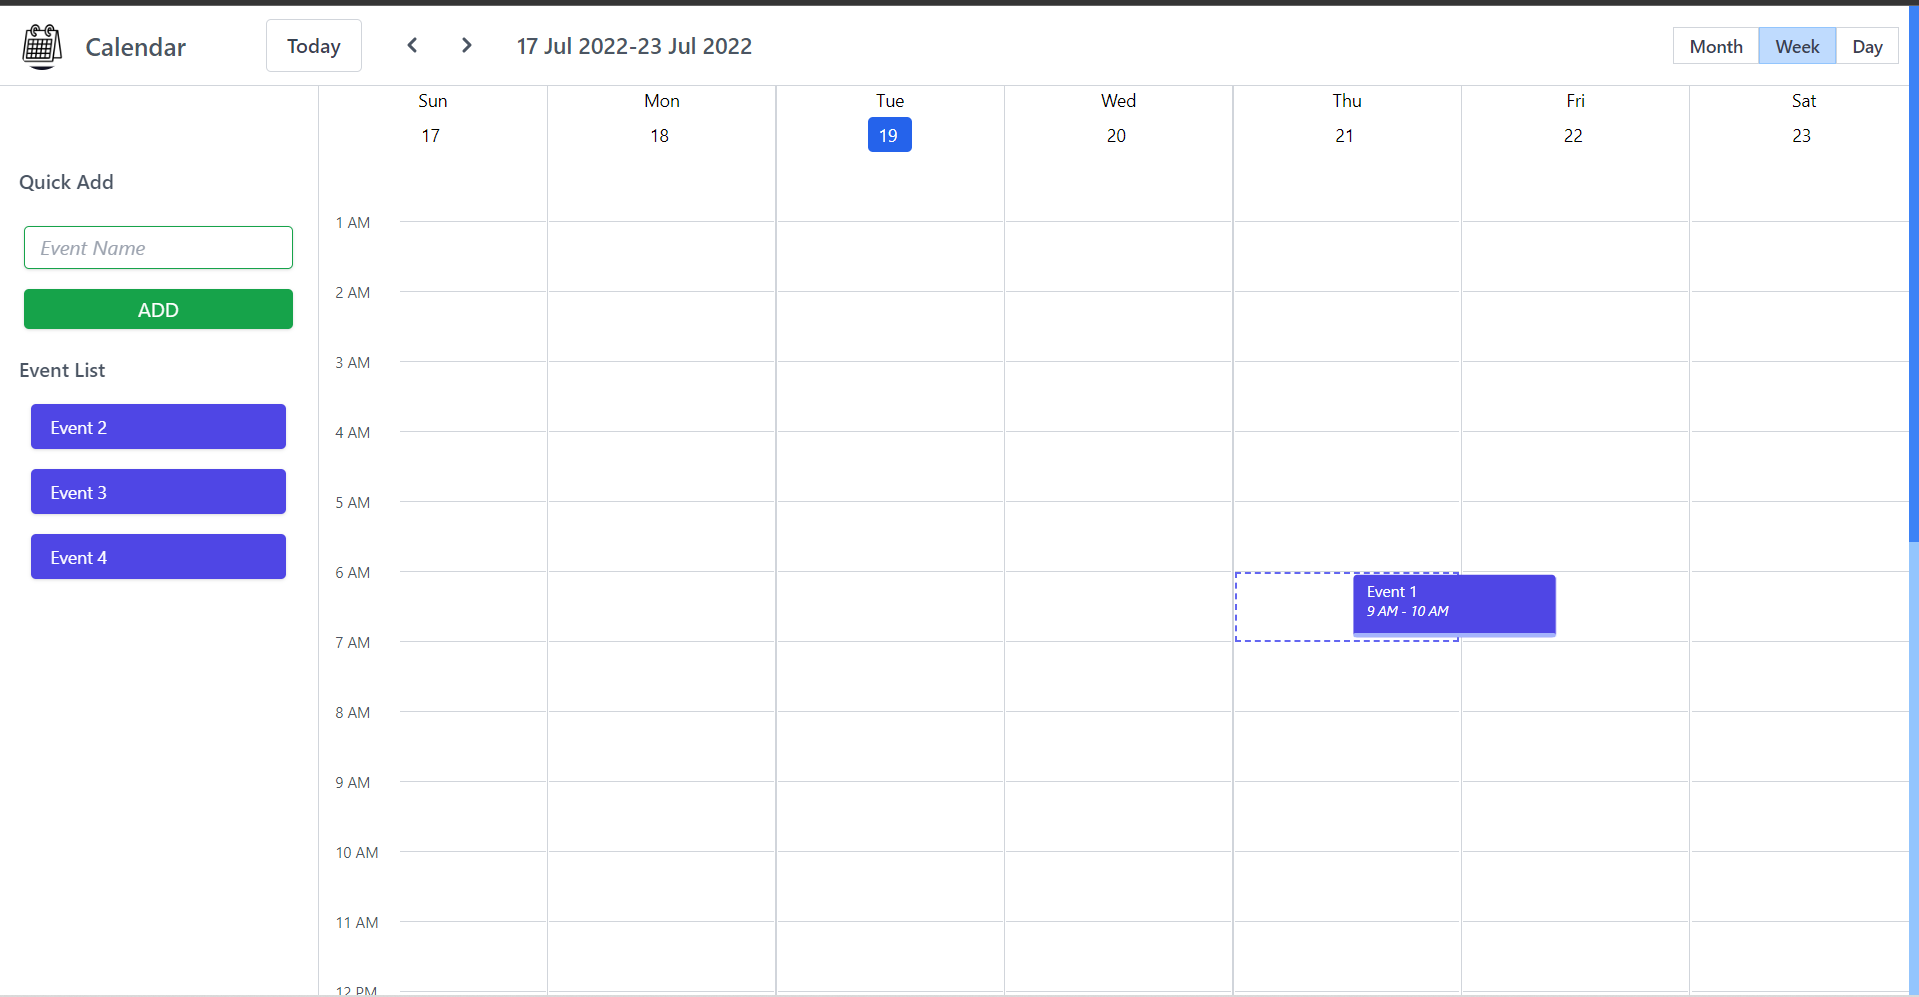 Image for React FullCalendar Events. Month, Week & Day views along with ability to drag, drop events & adjust(increase/decrease) duration of events.